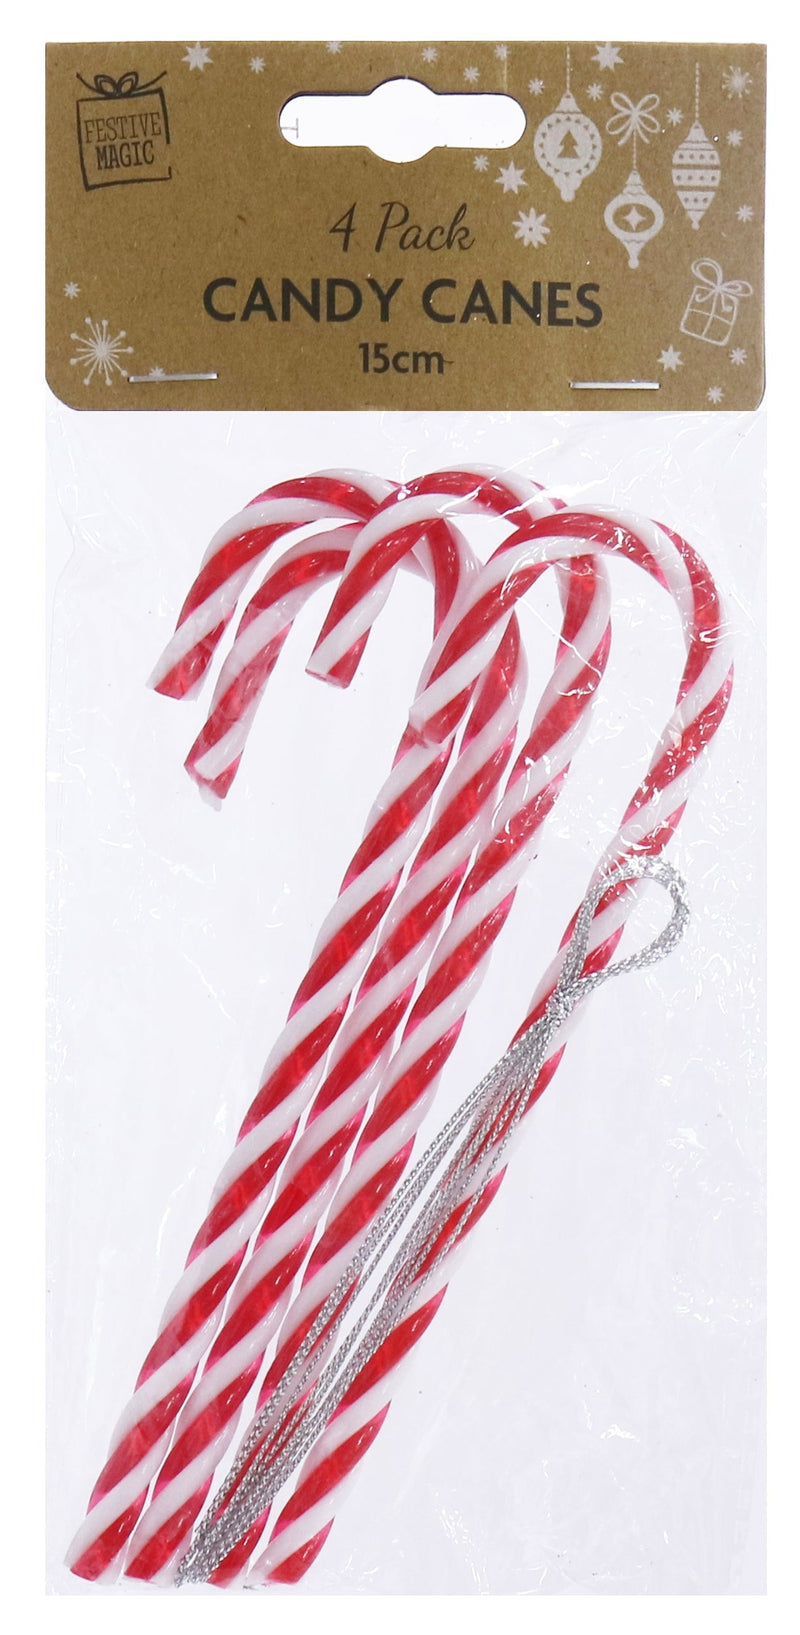 COMING SOON - DECO CANDY CANES 4pk